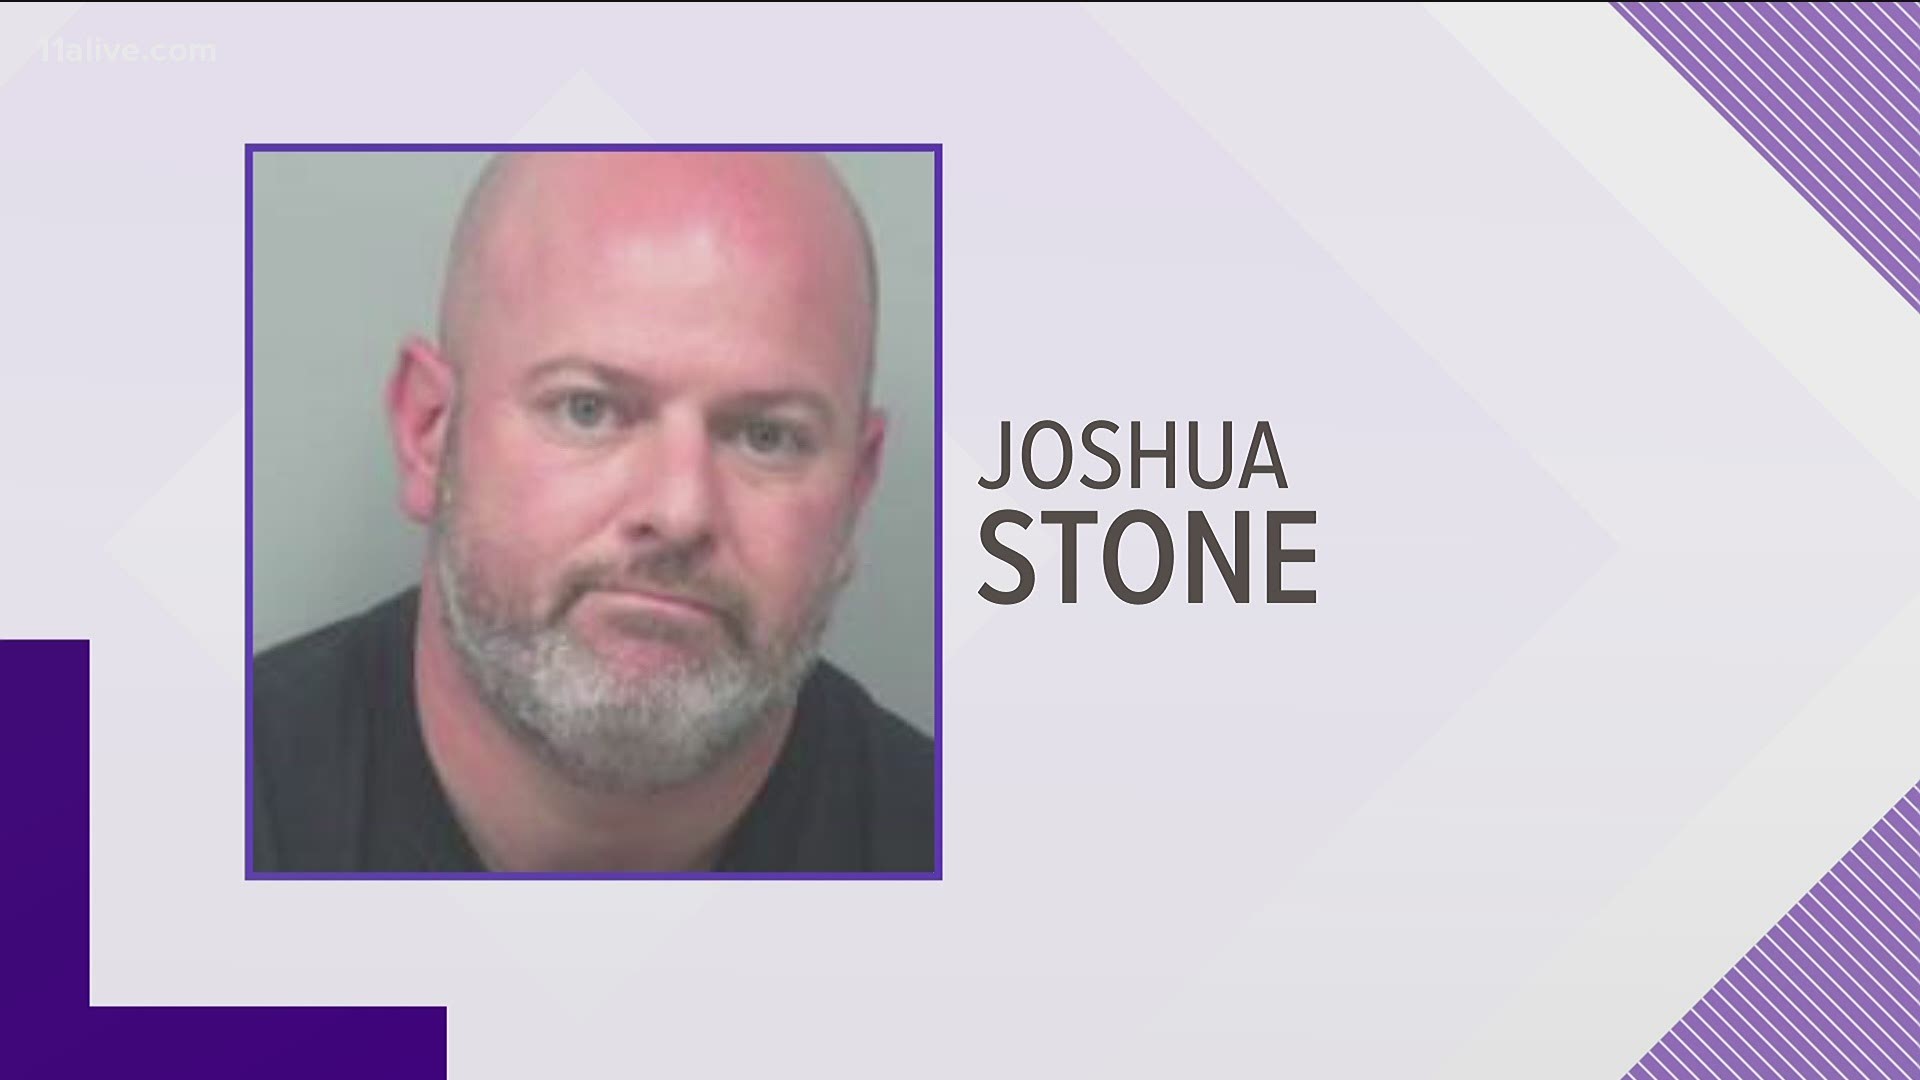 According to police, authorities have secured an arrest warrant for Joshua Stone, 43, for the Jan. 20 threat against the Duluth Smoothie King.